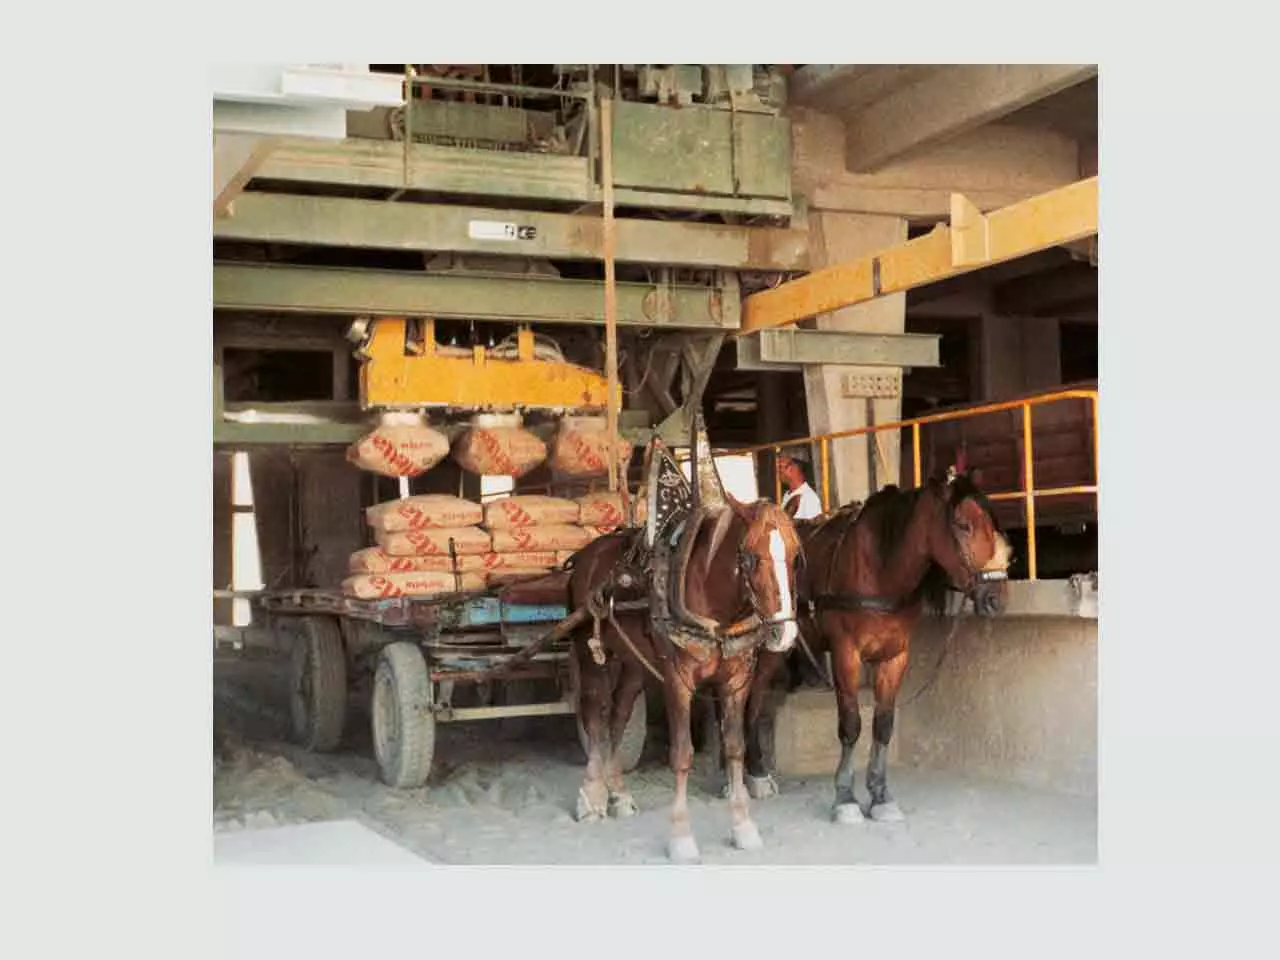 1969 CARICAMAT®  automatic truck loader for cement  – 1600 bags per hour